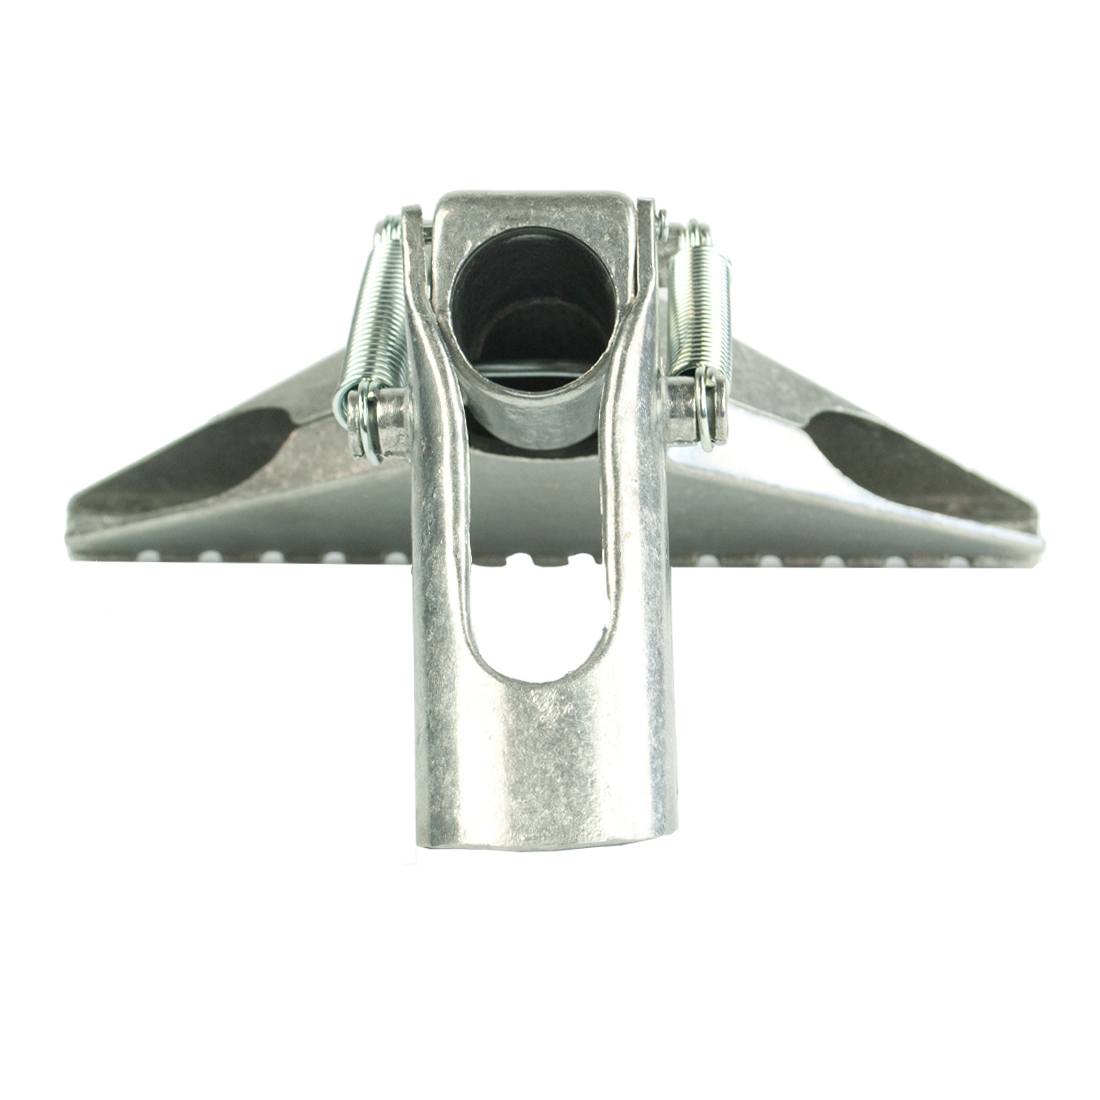 Pulex Multipurpose Clamp for Pole - Back View